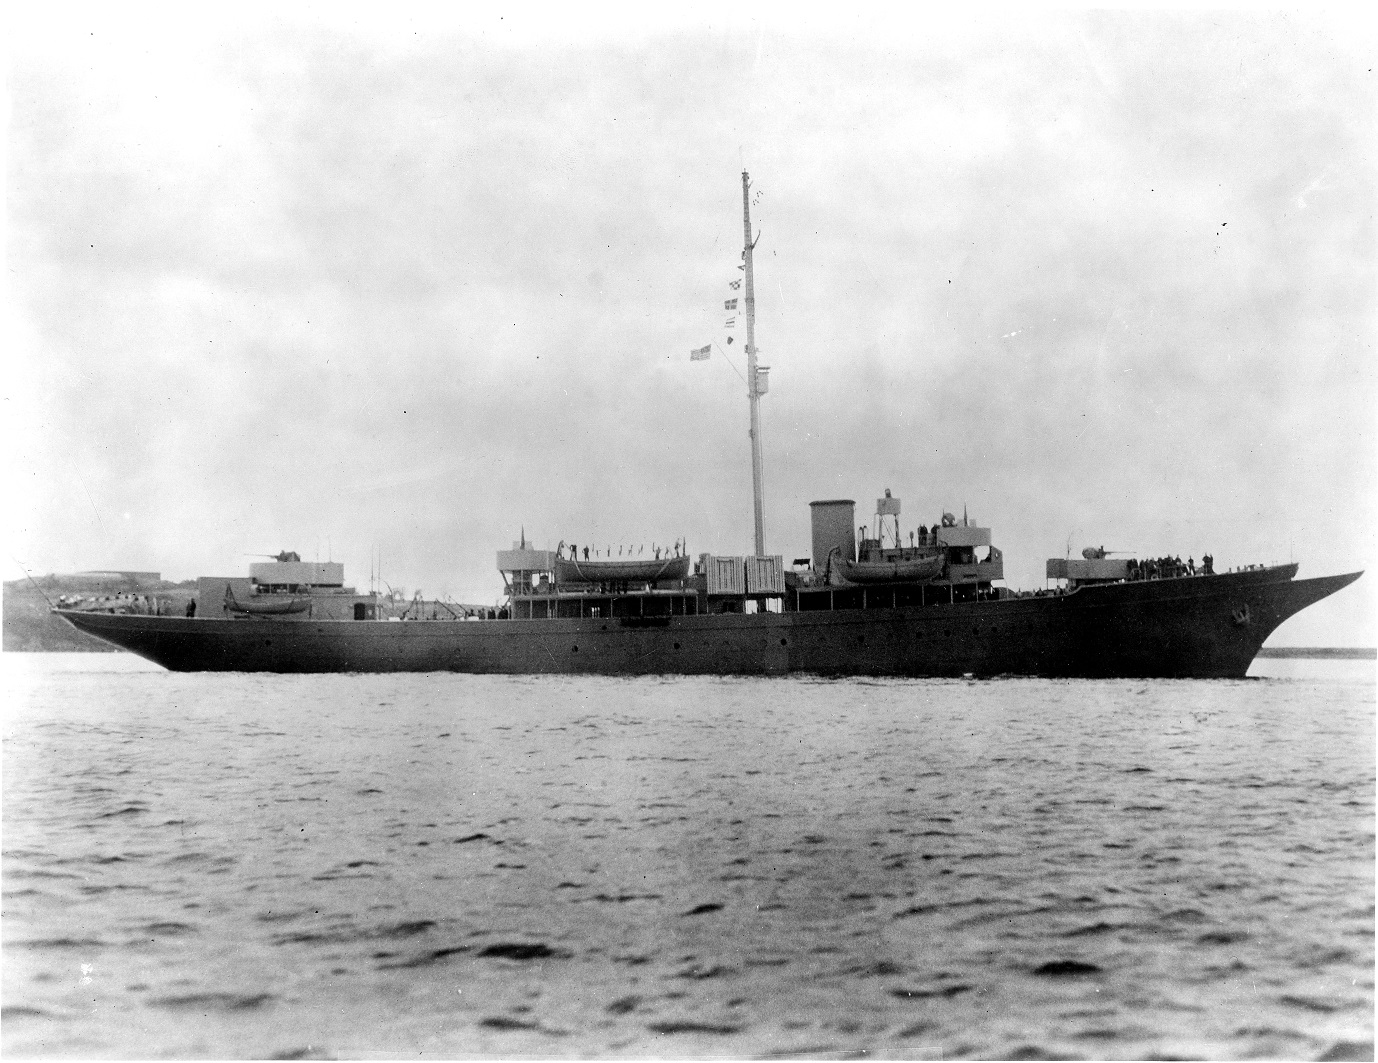 Photo of the famous Cutter Sea Cloud, the first official desegregated ship in U.S. sea services. Clarence Samuels was one of the black officers serving aboard the cutter. (U.S. Coast Guard Collection)